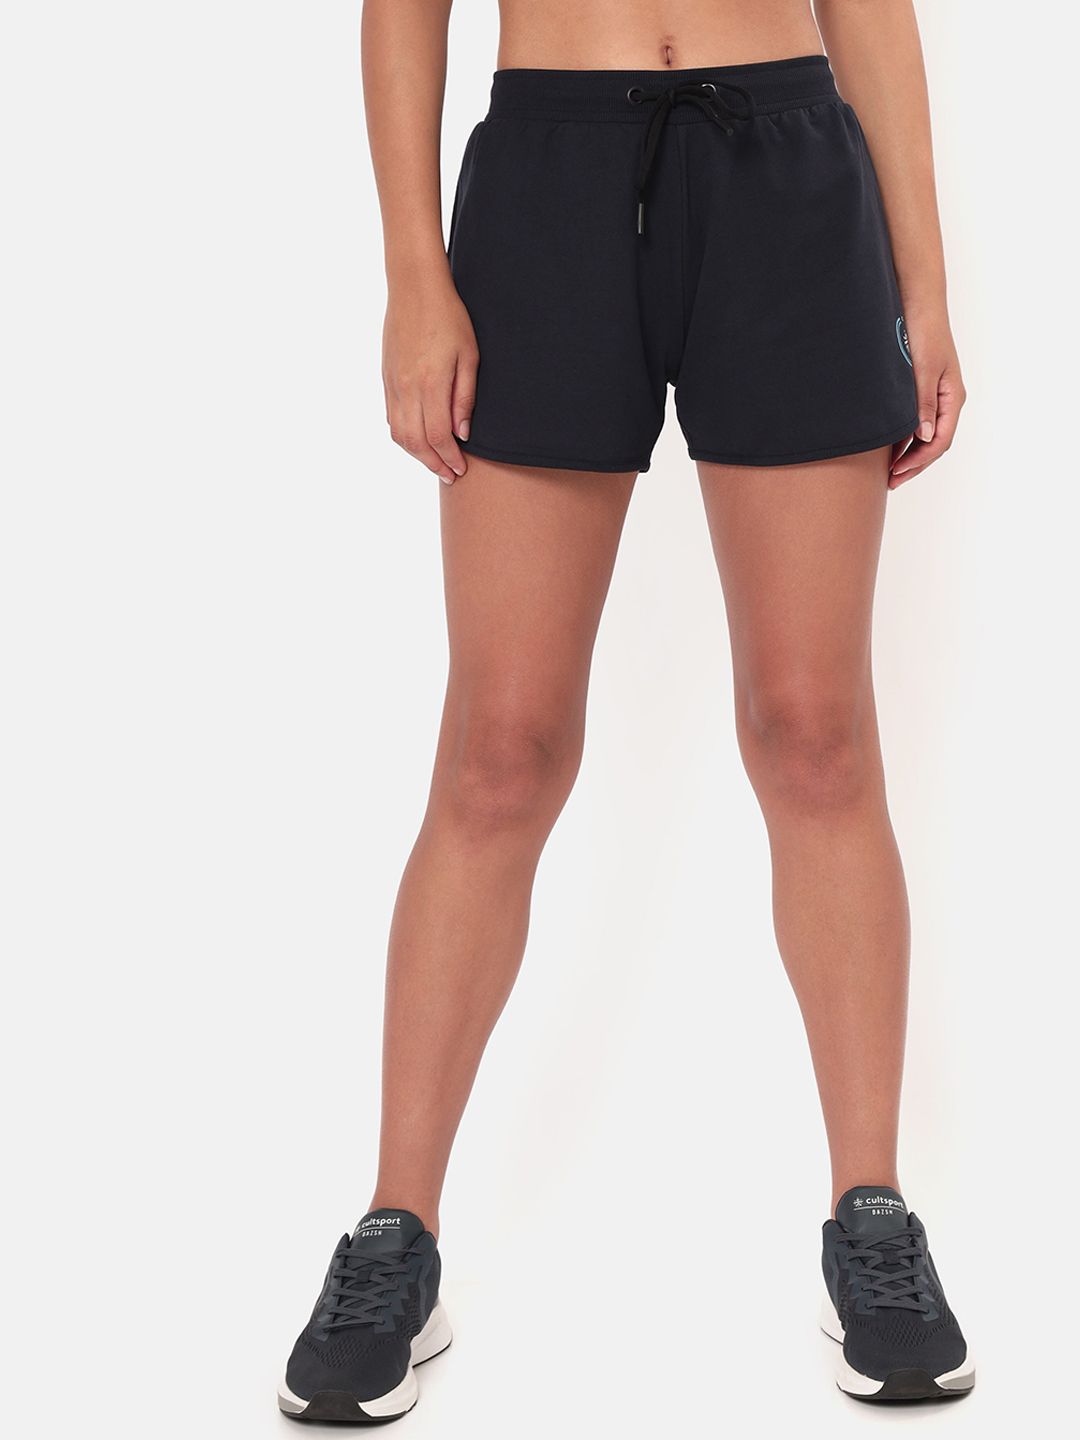 Cultsport Women Navy Blue Cotton Training or Gym Chino Shorts Price in India